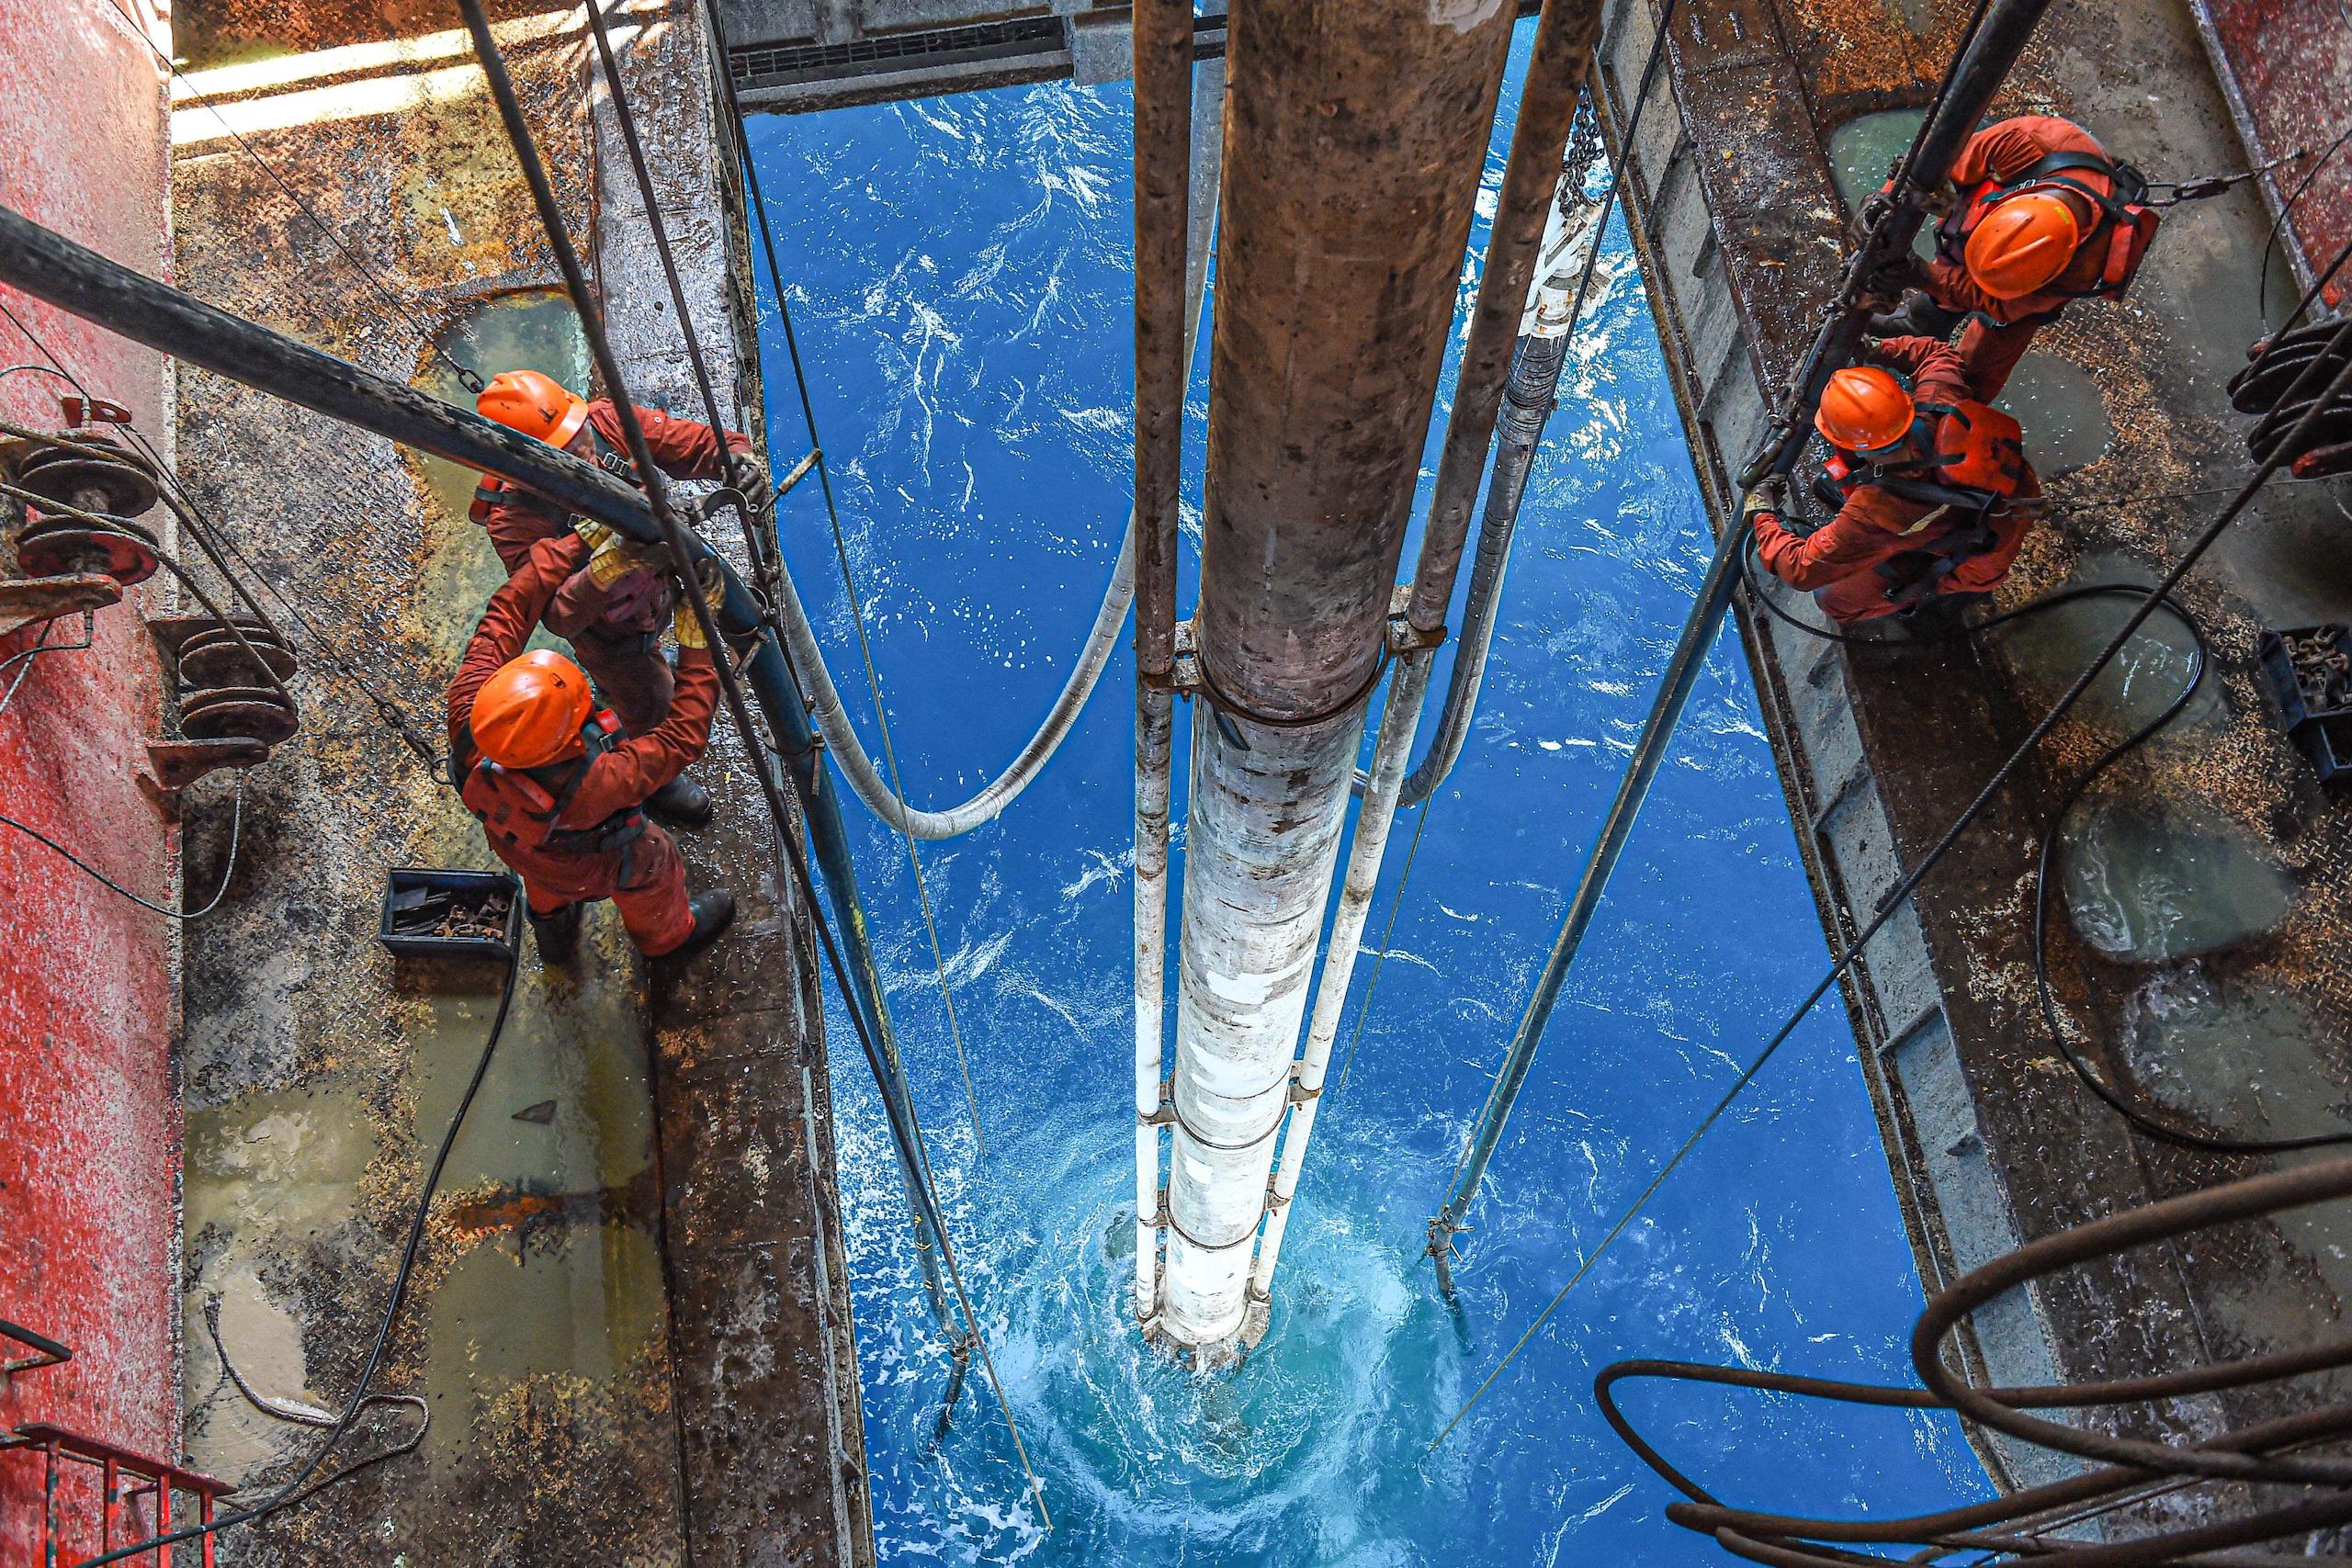 Chinese workers drill for oil in the South China Sea